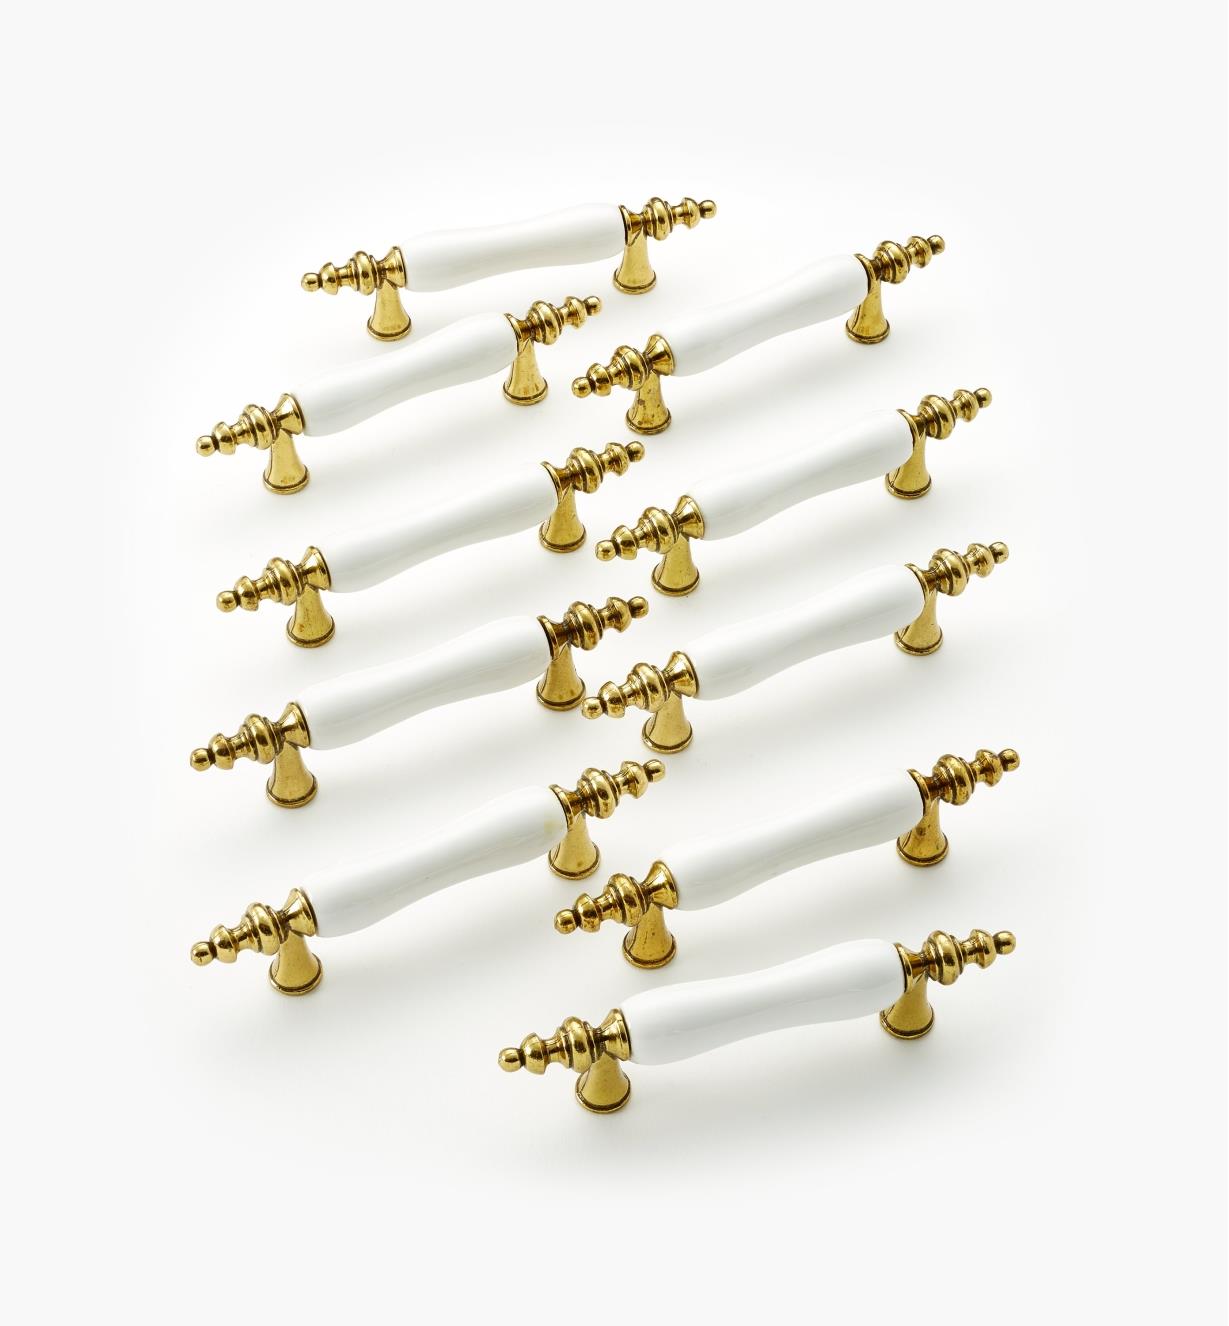 03W1601 - Belwith Ceramic Finial-Tipped Pull, pkg. of 10